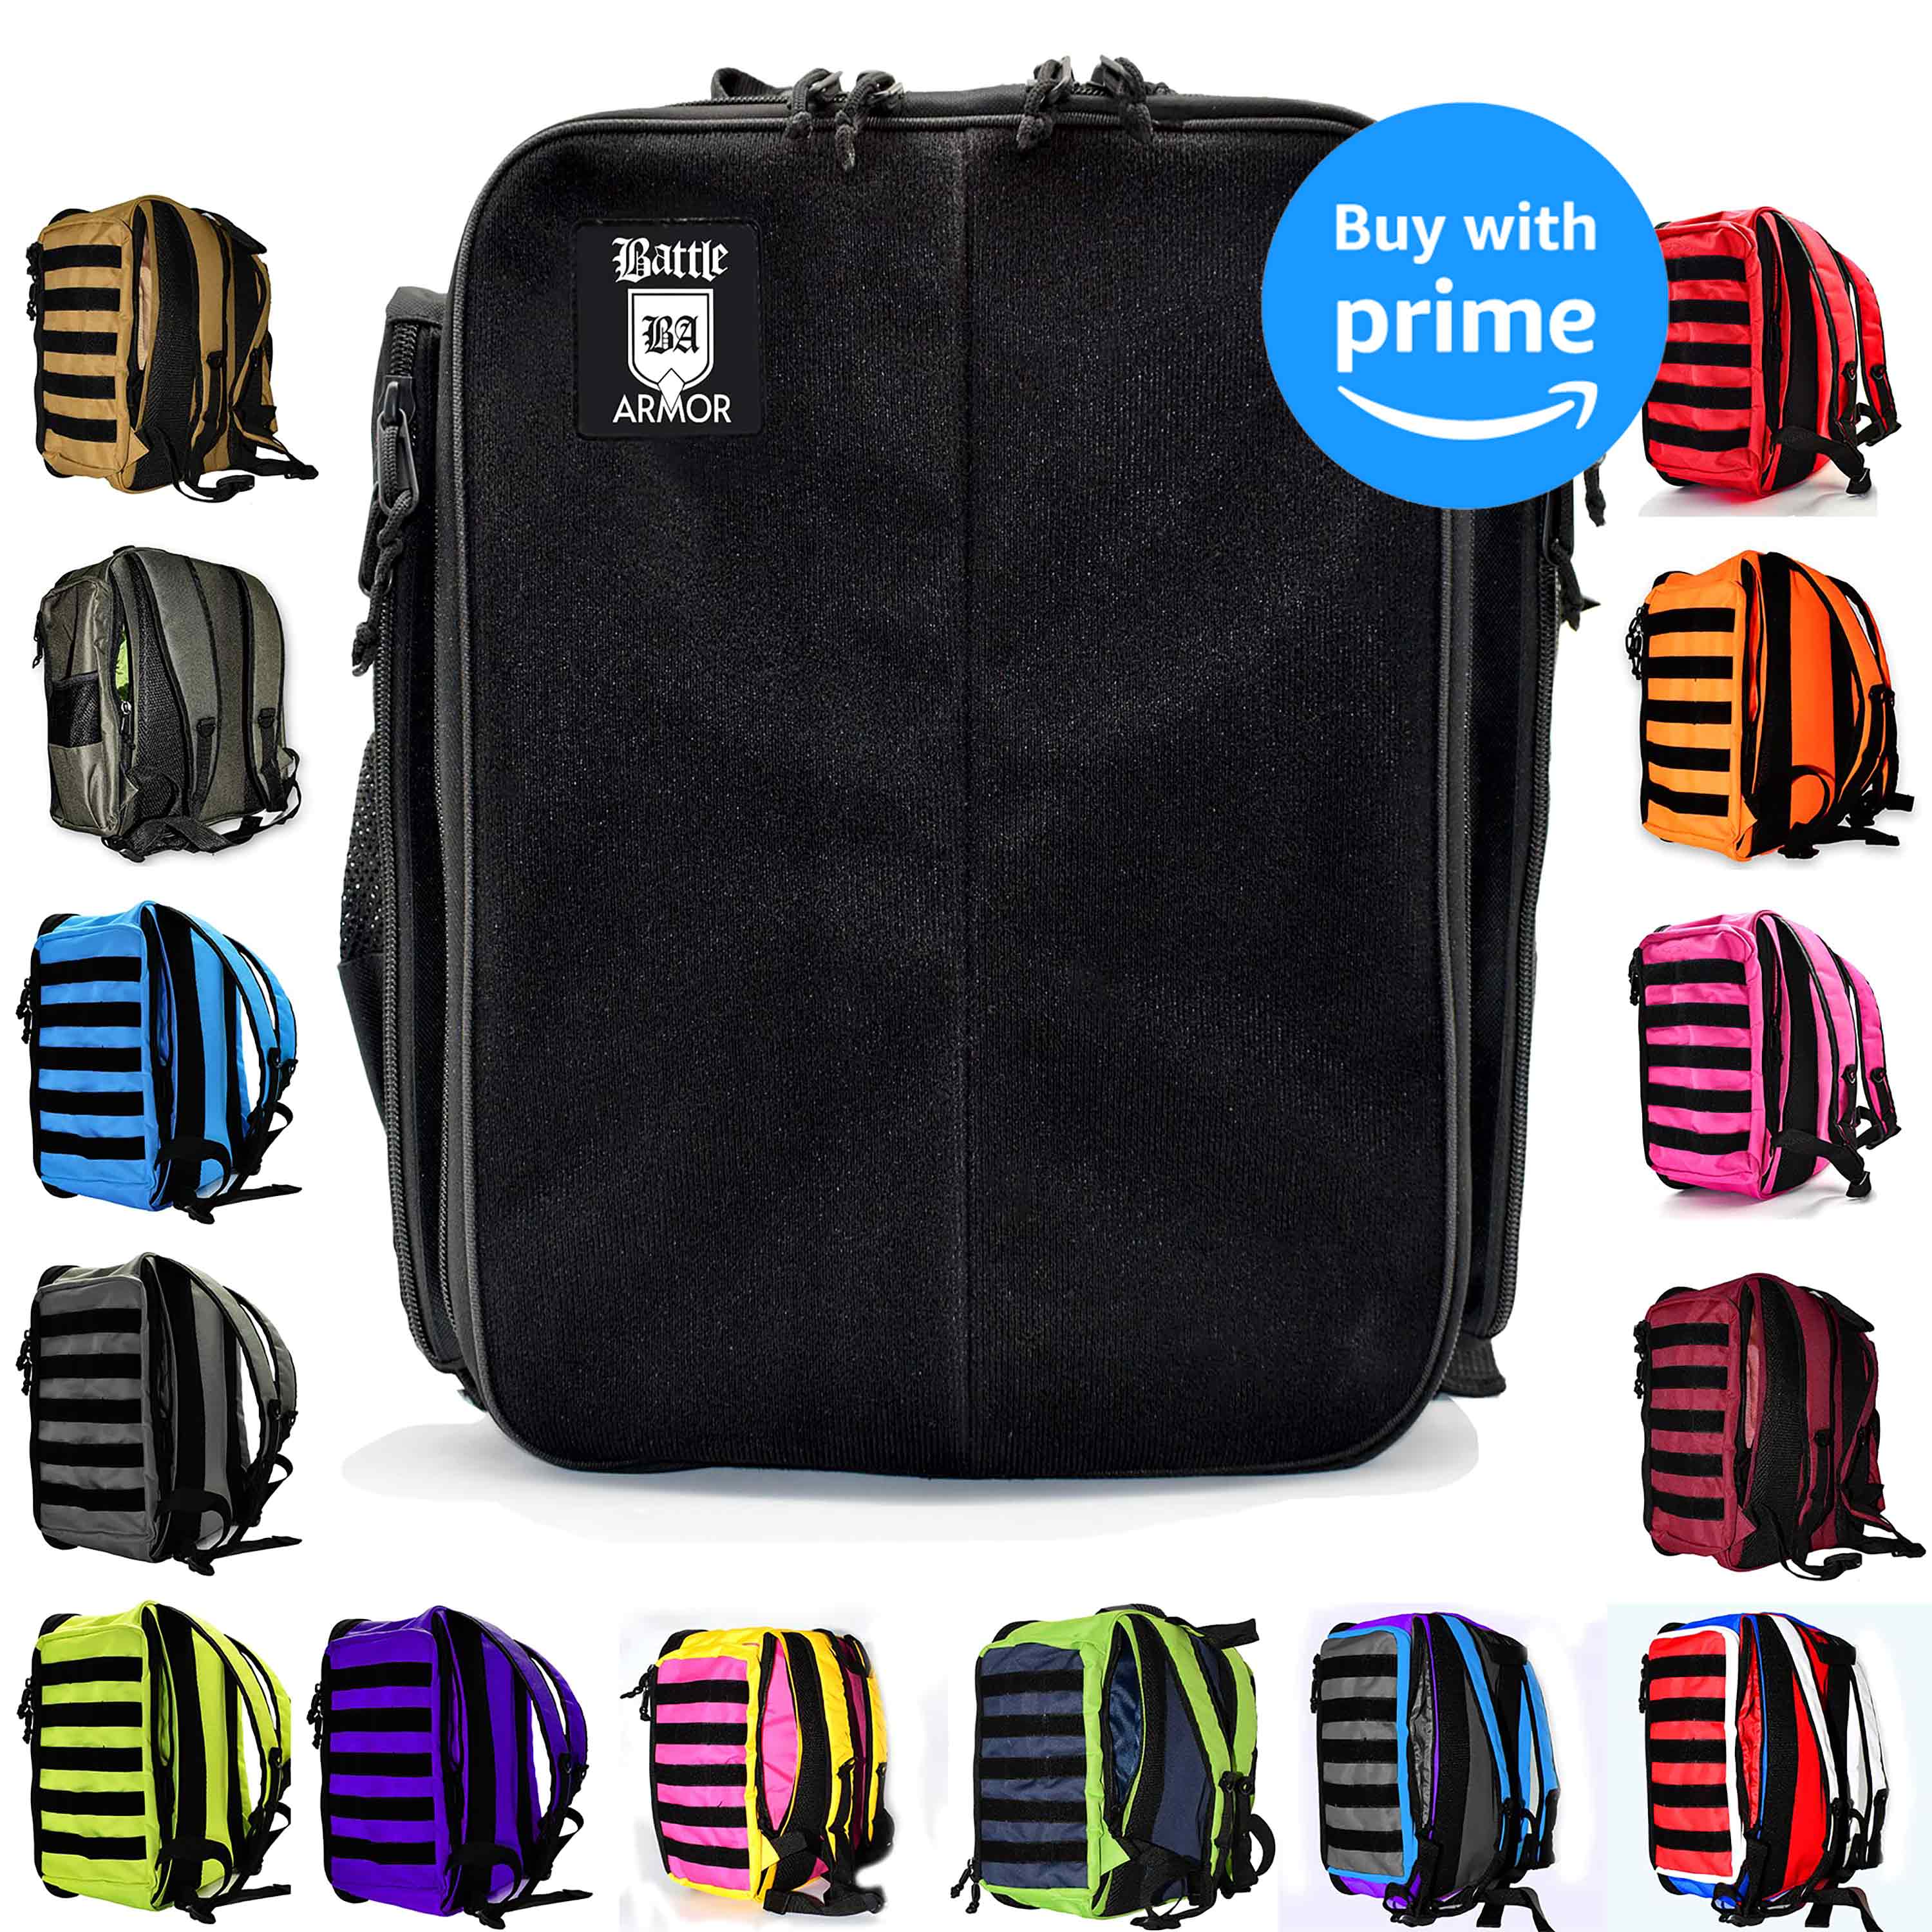 Battle Armor | Cornhole Backpack for Bags | Holds Up to 20 Regulation Sized Cornhole Bags Black